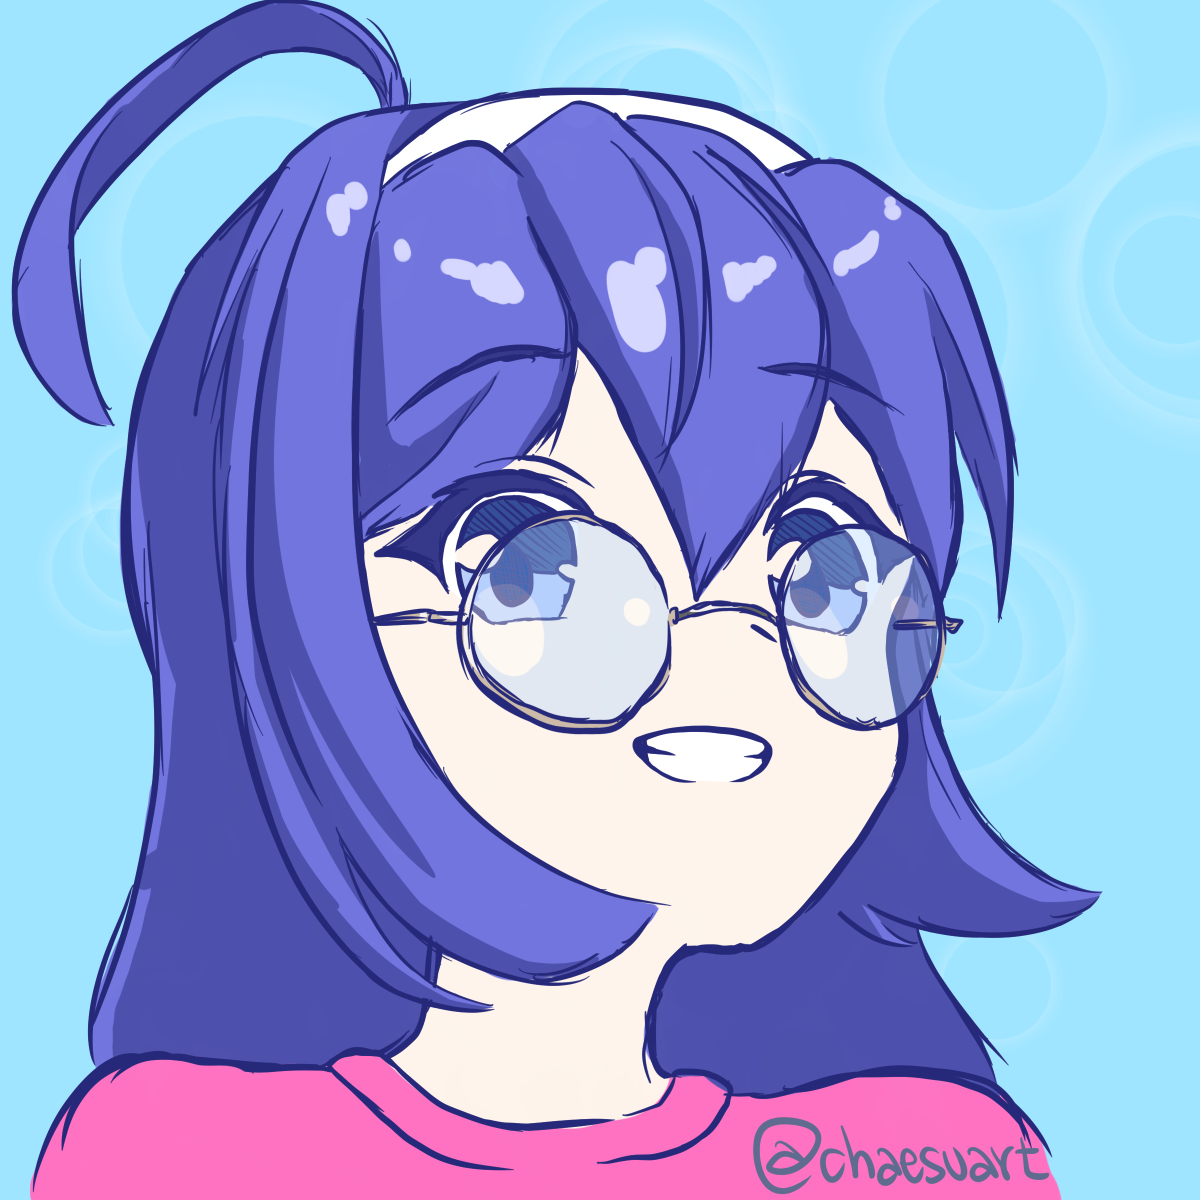 Orie with glasses :3